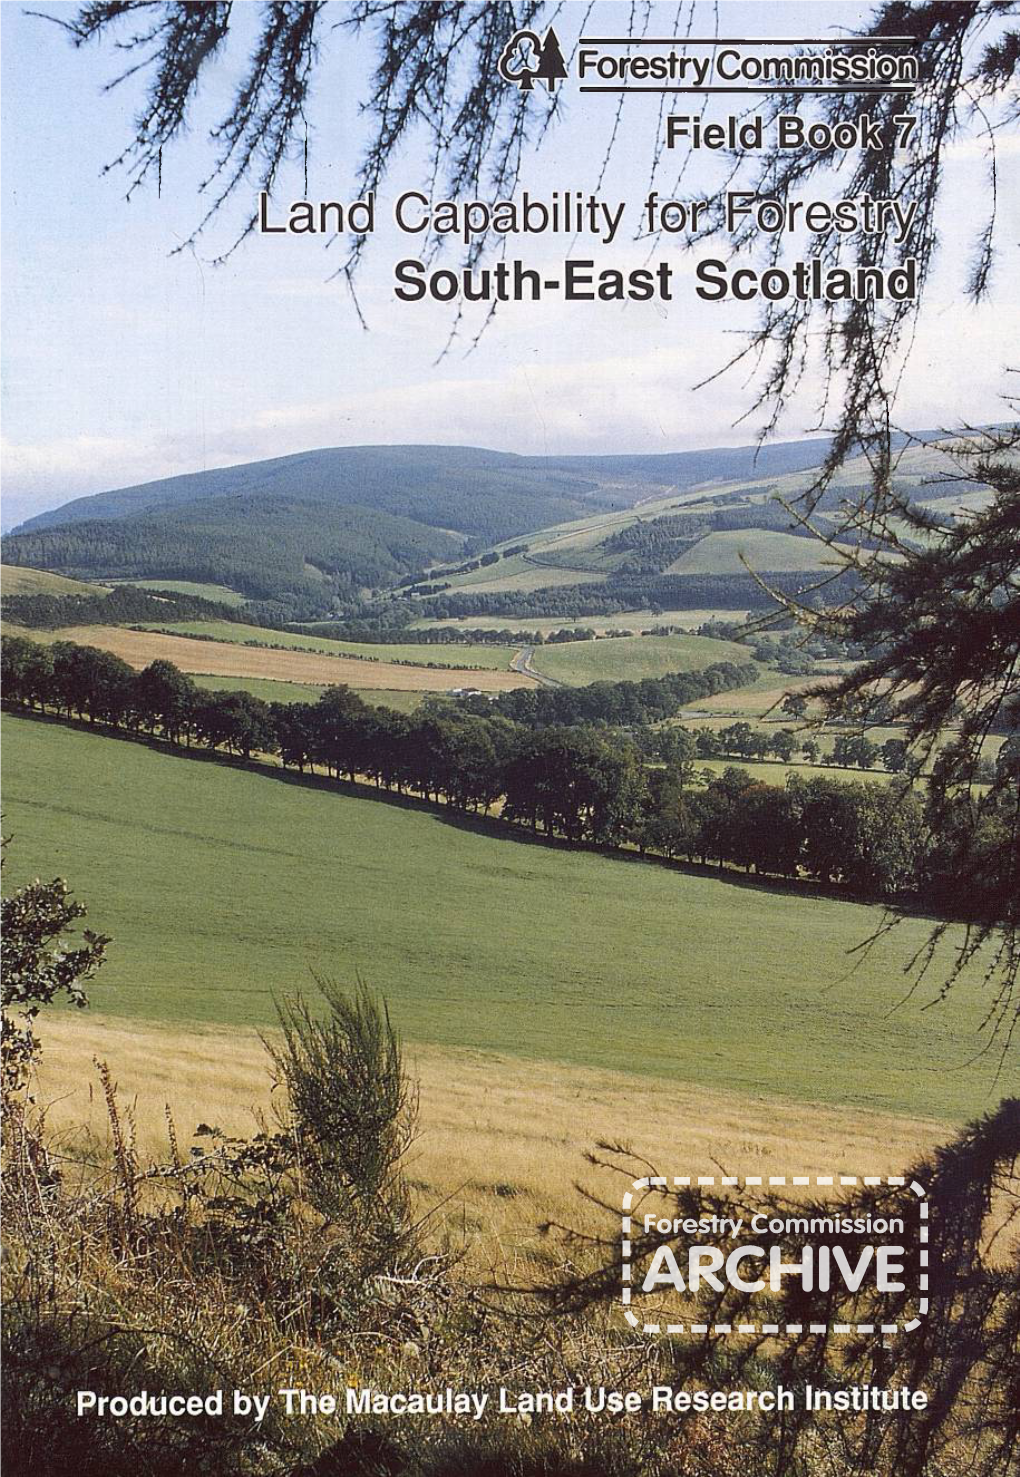 Land Capability for Forestry in South-East Scotland